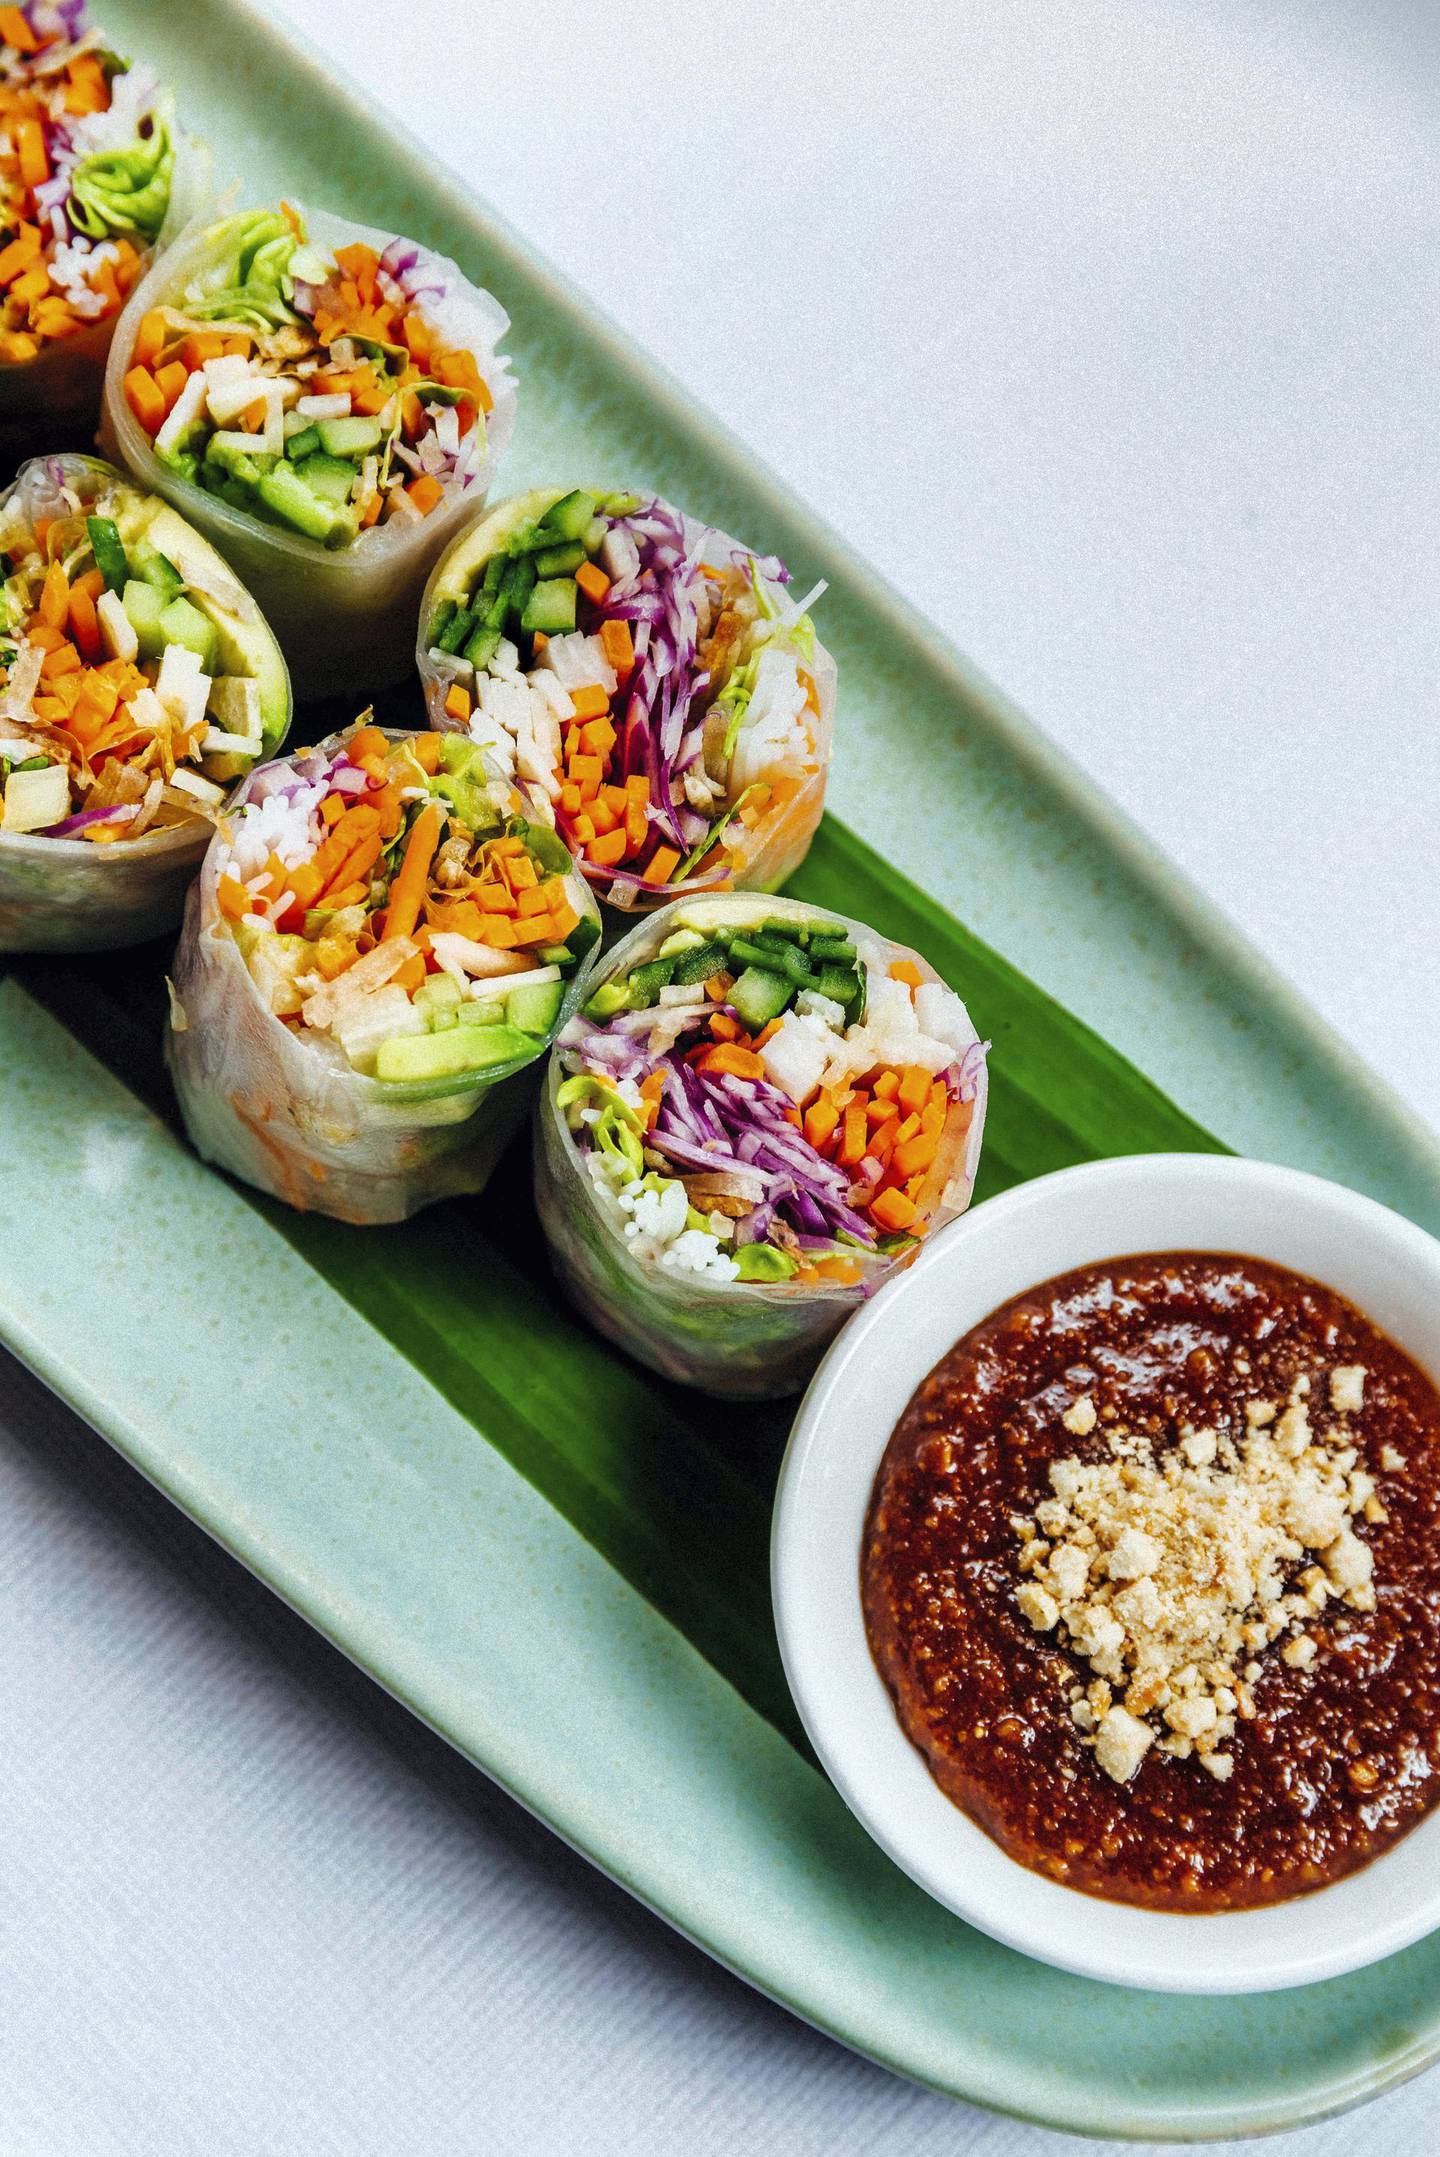 The vegetable summer spring rolls from Indochine's business lunch menu. Supplied